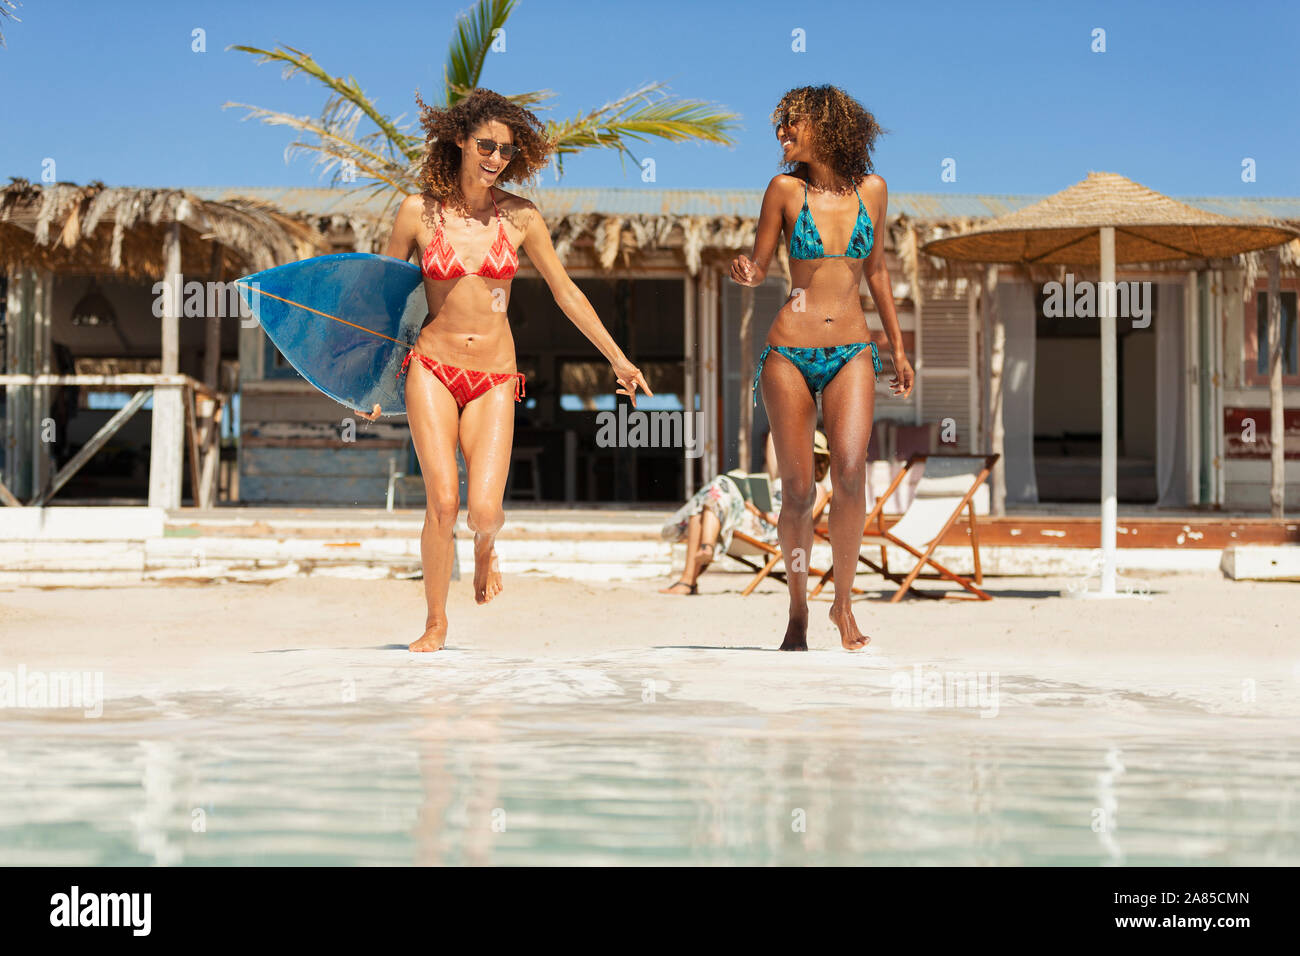 Carefree young women friends with surfboard on sunny beach Stock Photo